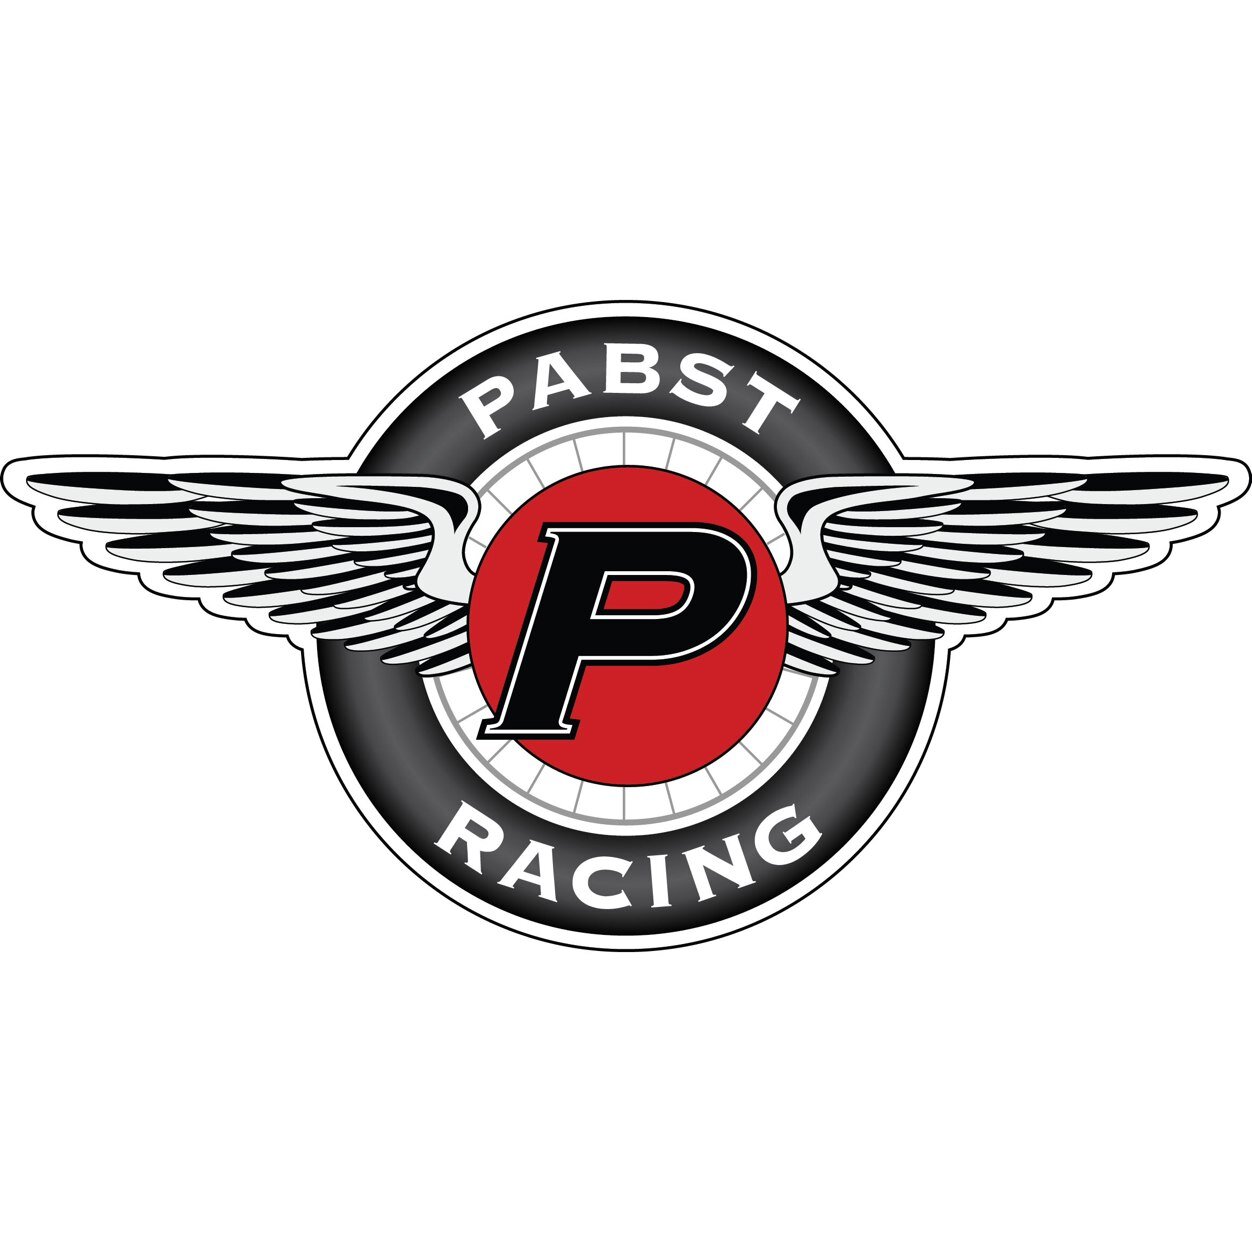 Pabst Racing